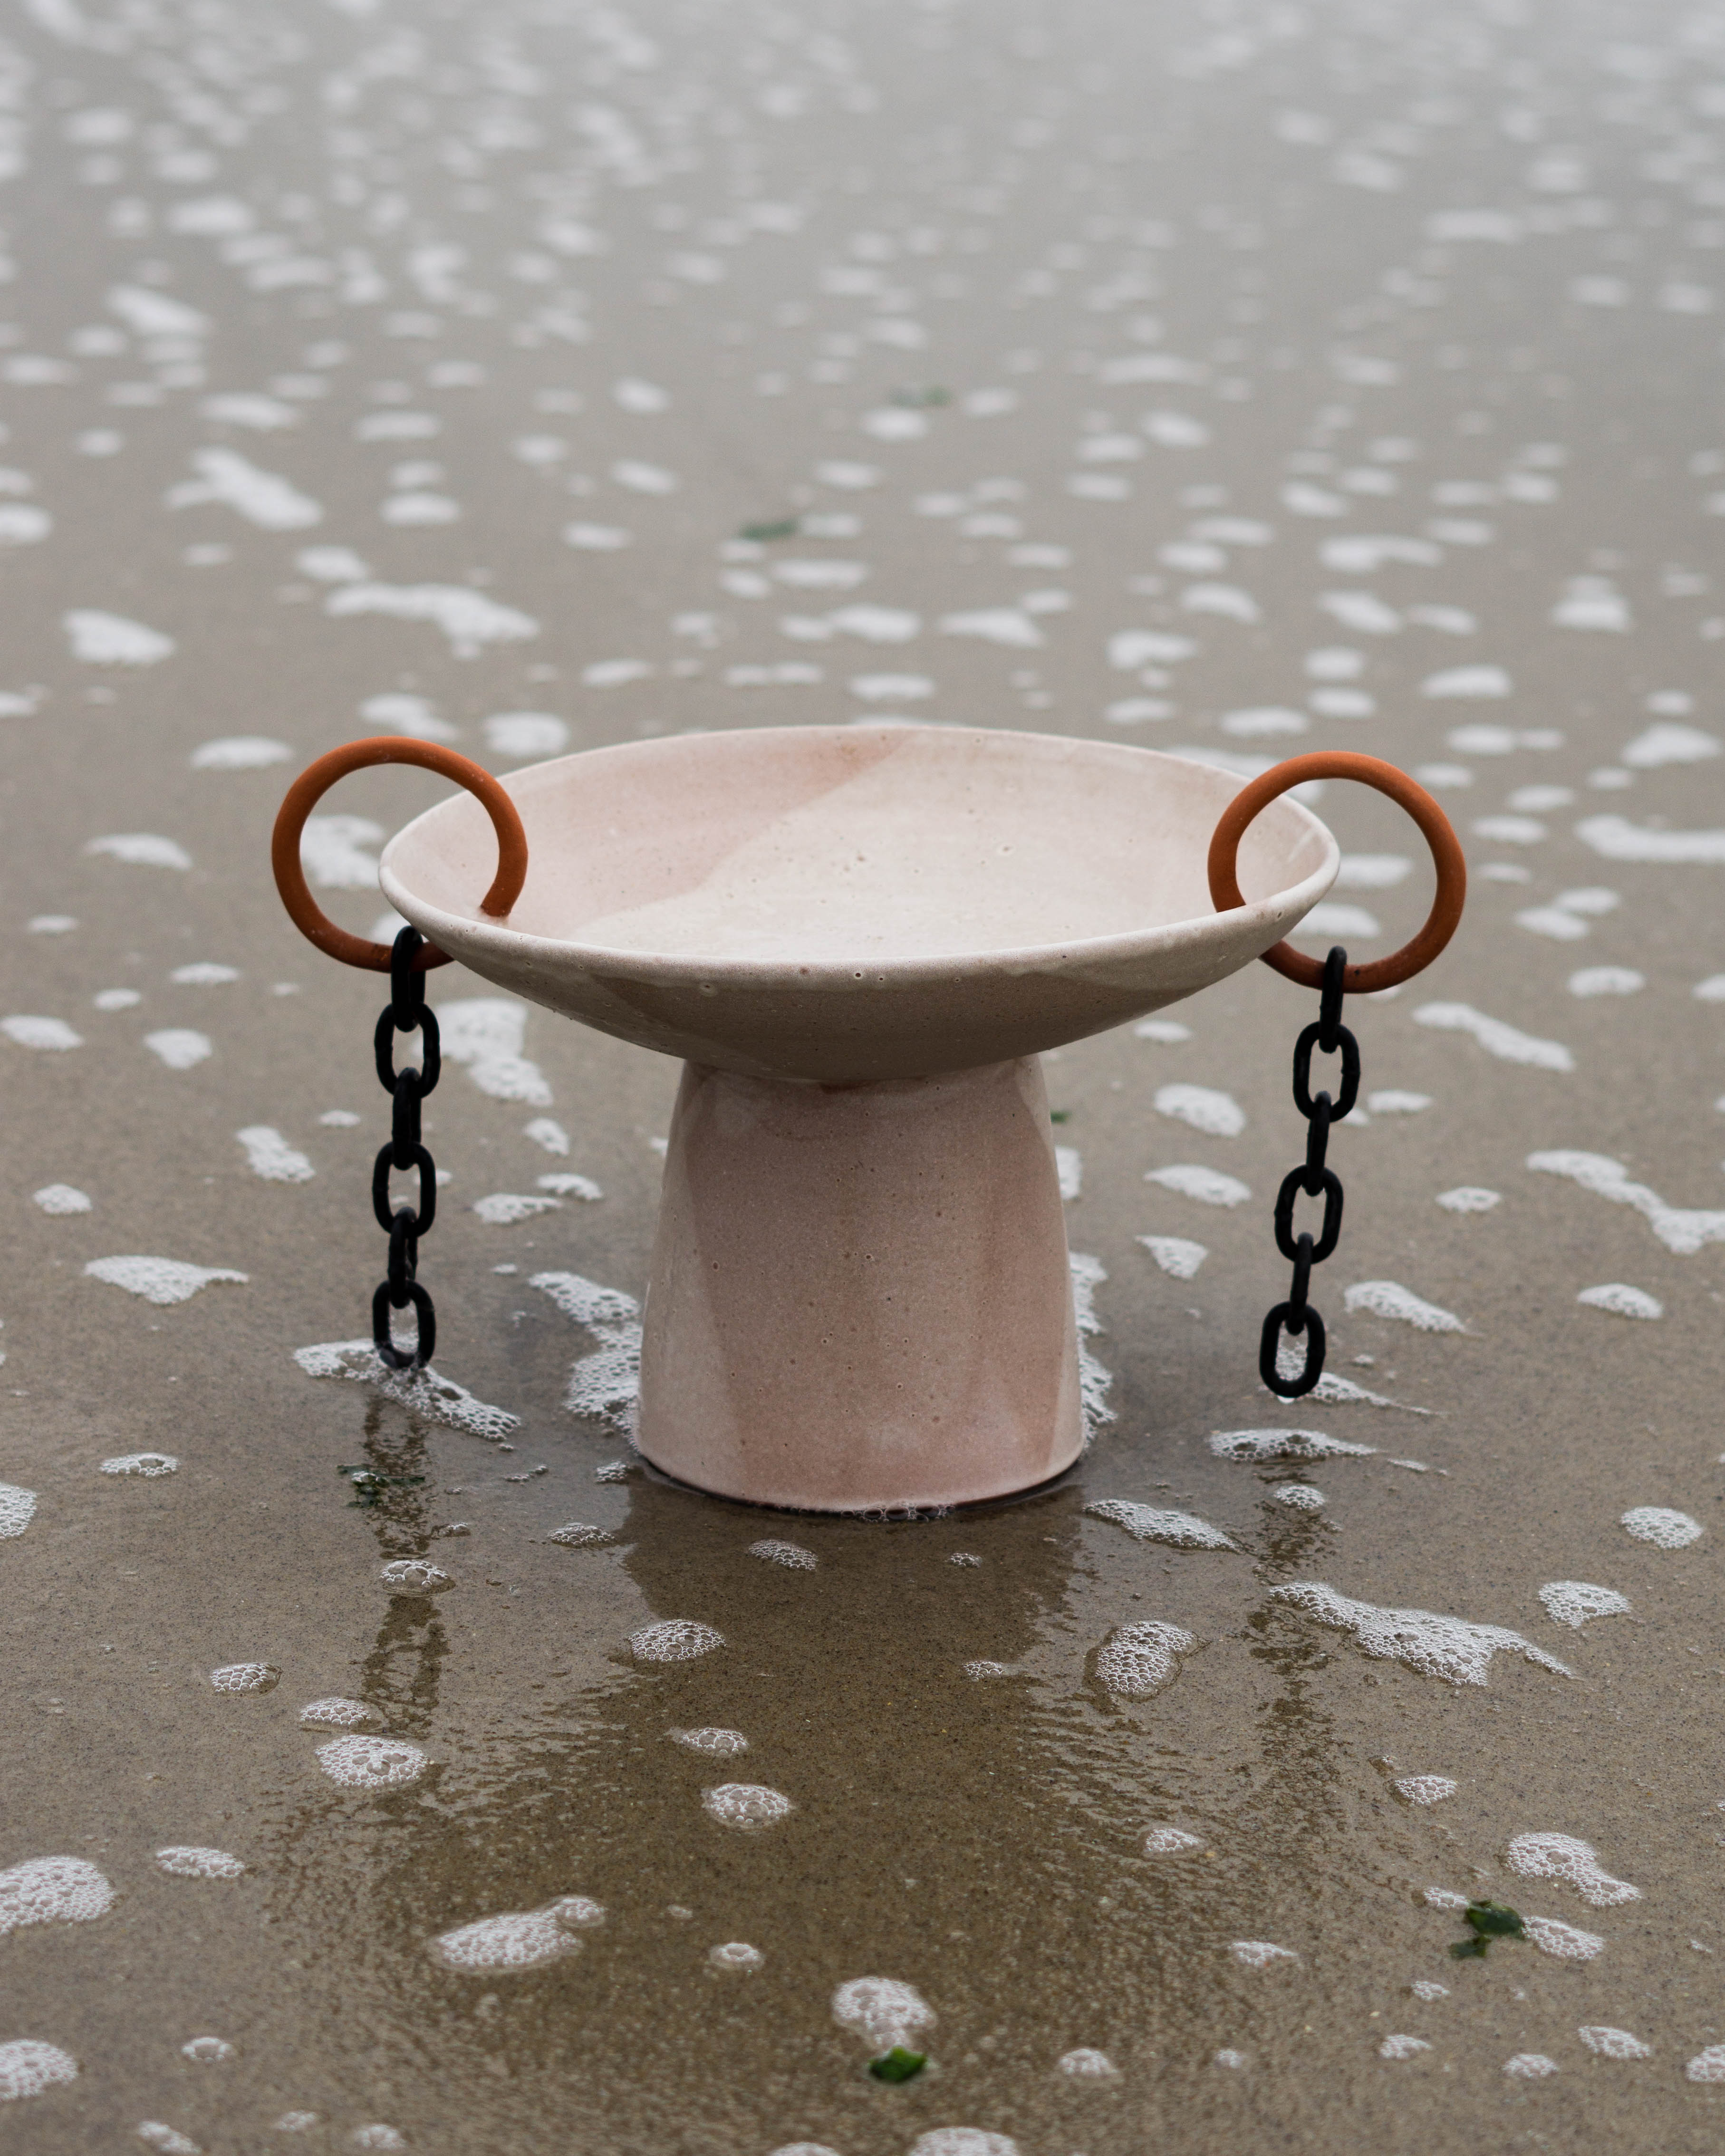 Pedestal bowl with chainlink detail shown in beach setting